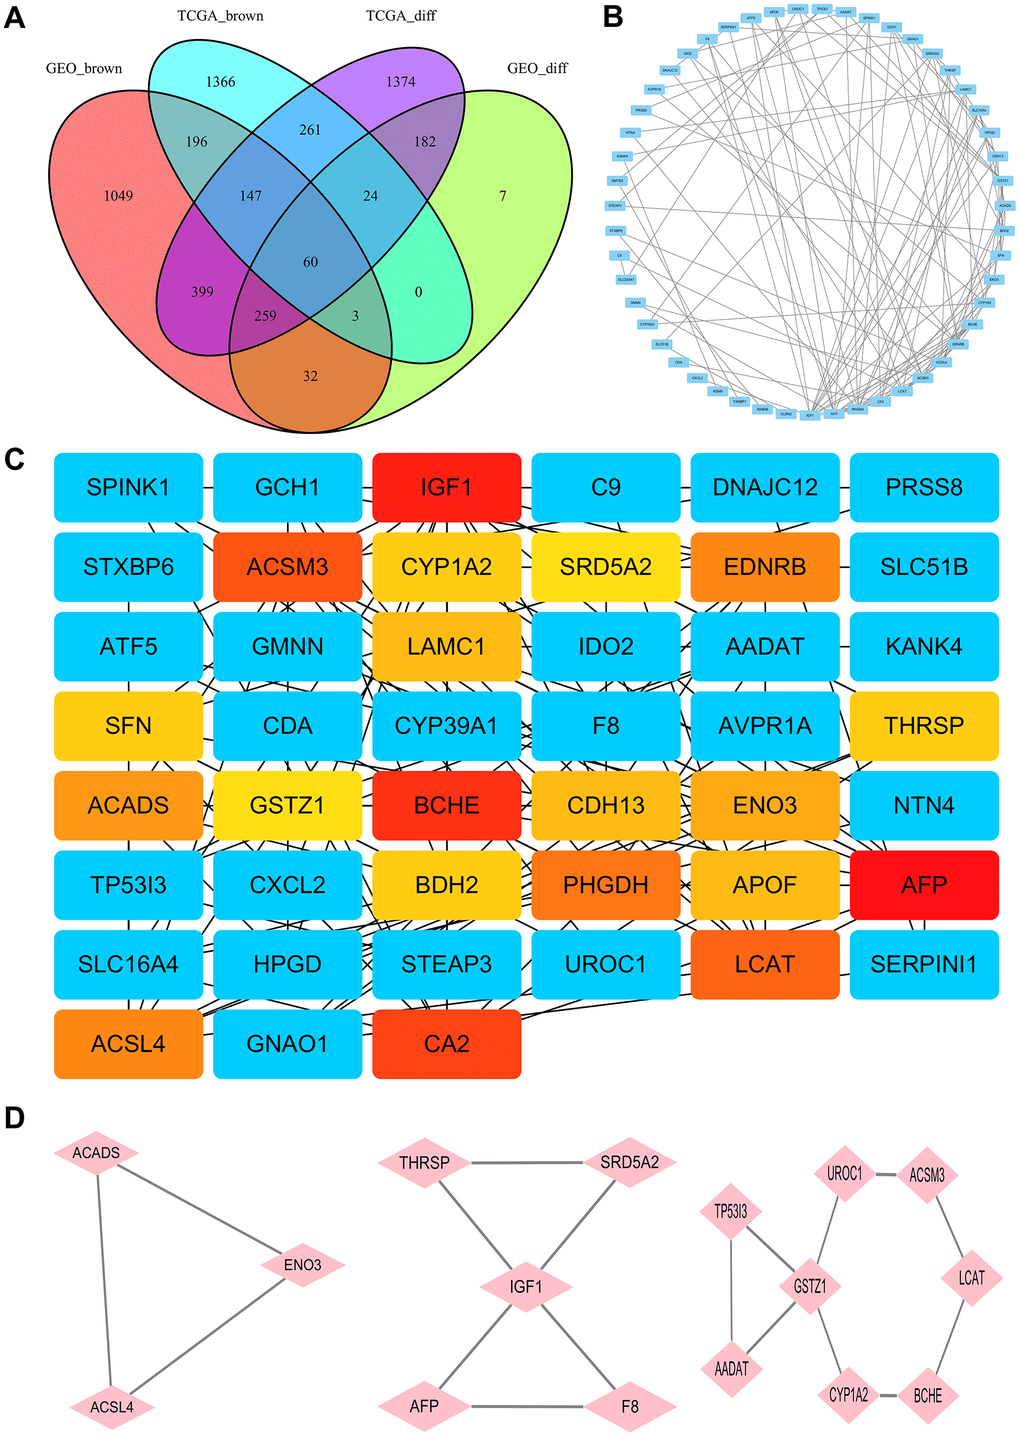 Identification of hub genes. (A) The Venn diagram for selection of the differential co-expression genes among DEG lists and co-expression modules. (B) PPI network of the intersection genes between DEG lists and co-expression modules. Each blue node represents a gene. Edges among nodes indicate interaction associations between genes. (C) Identification of the core genes from the PPI network by MCC algorithm. Darker colors refer to higher MCC sores. (D) The top three significant modules of the PPI network were evaluated in MOCDE. Pink nodes represent genes in corresponding modules.